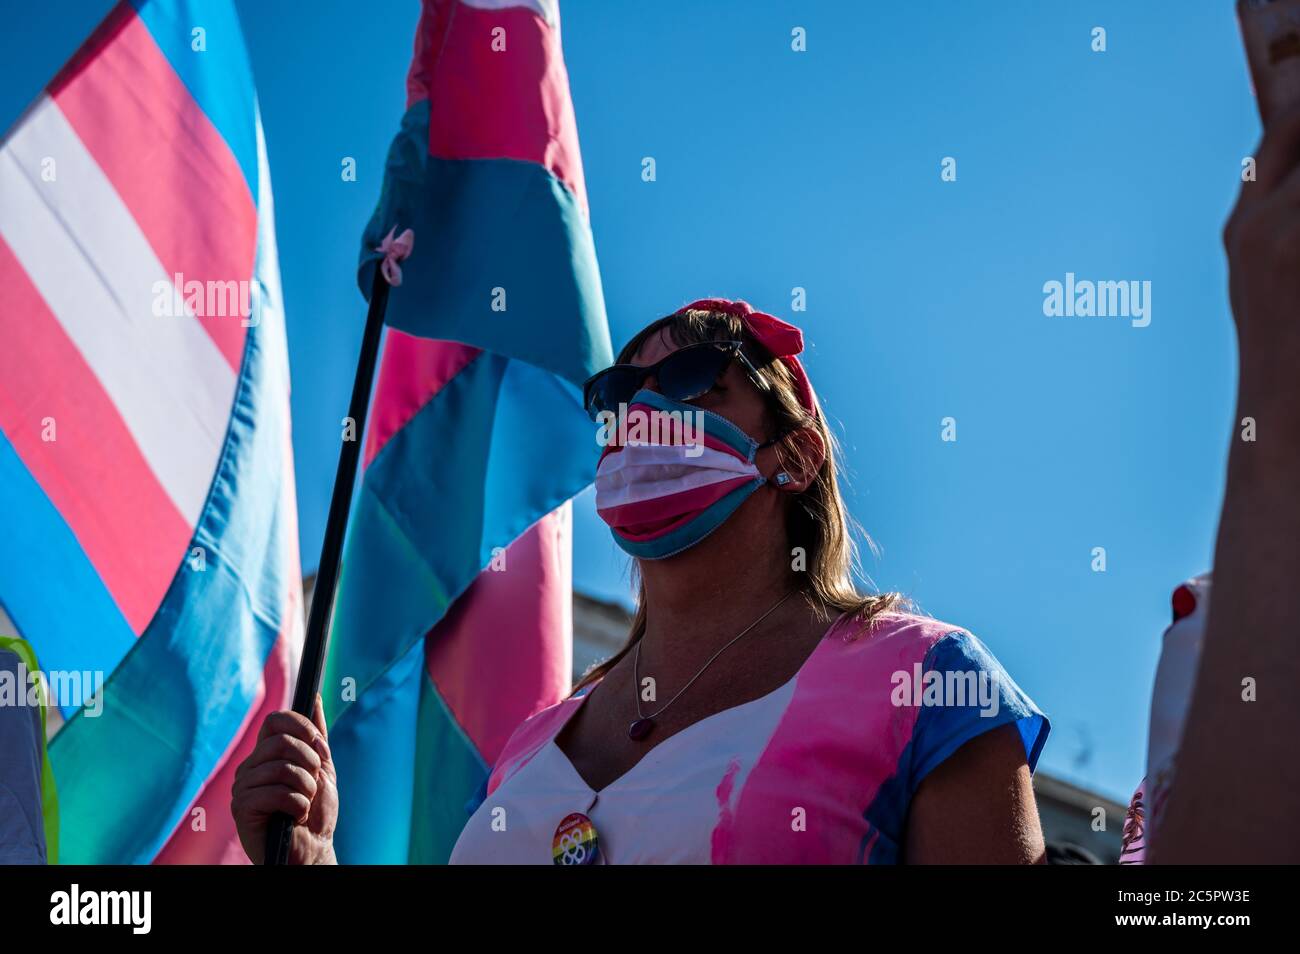 Madrid, Spain. 04th July, 2020. Demonstrator with the Trans flag attends a protest where Trans community demand a state law that will guarantee gender self-determination. The protest coincides with the Pride celebrations that are taking place this week. Credit: Marcos del Mazo/Alamy Live News Stock Photo